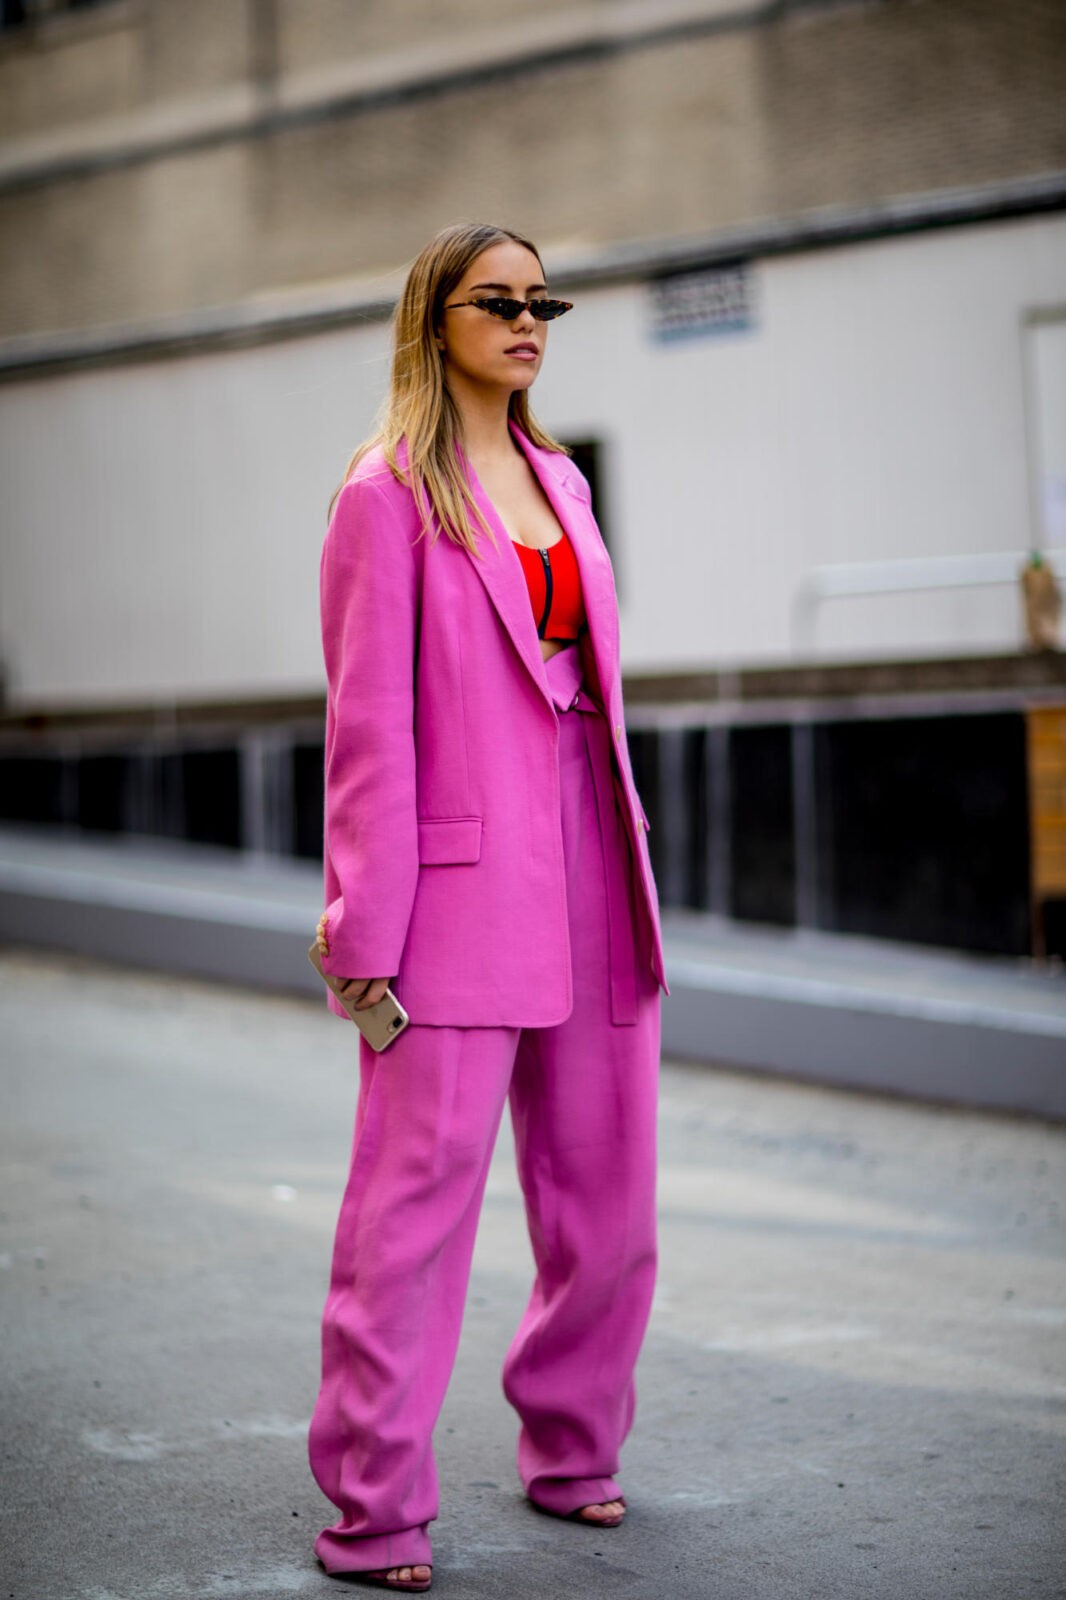 Street Style Suits Up at New York Fashion Week – SMU Look